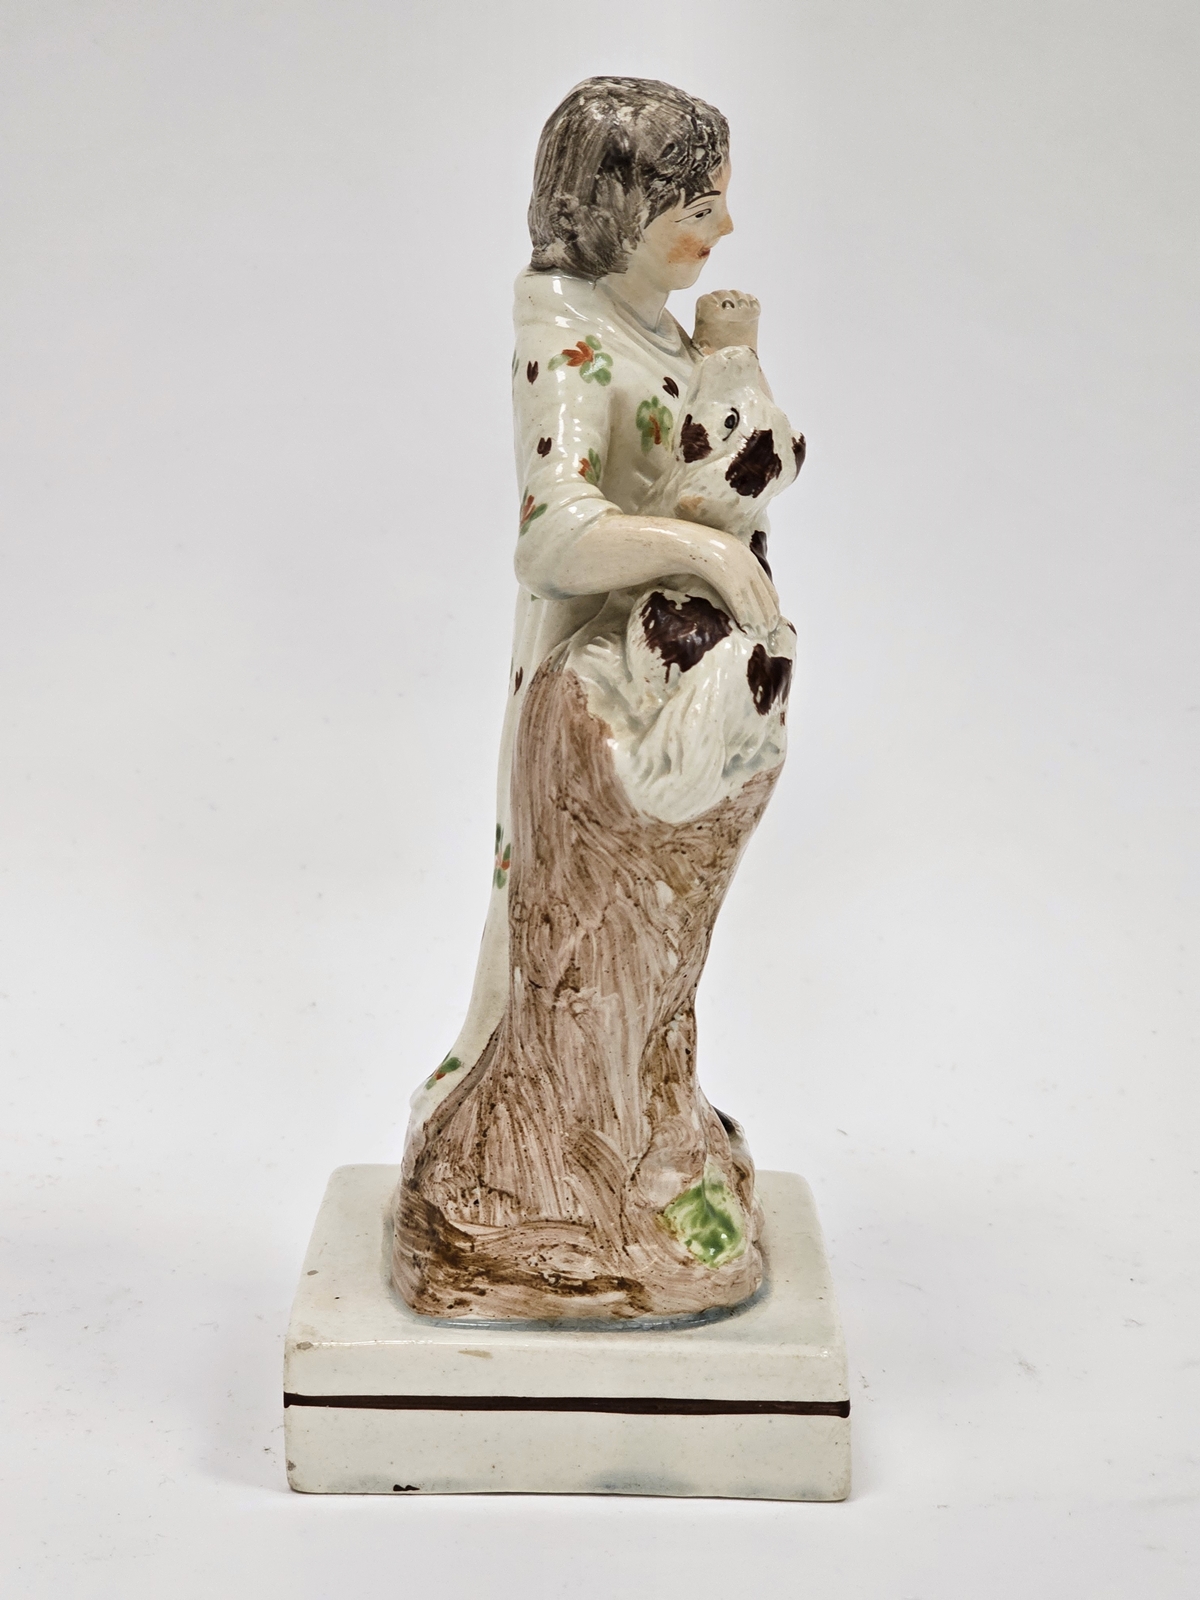 Theophilus Smith Staffordshire pearlware figure of a man and hound, late 18th century, impressed T. - Image 2 of 4